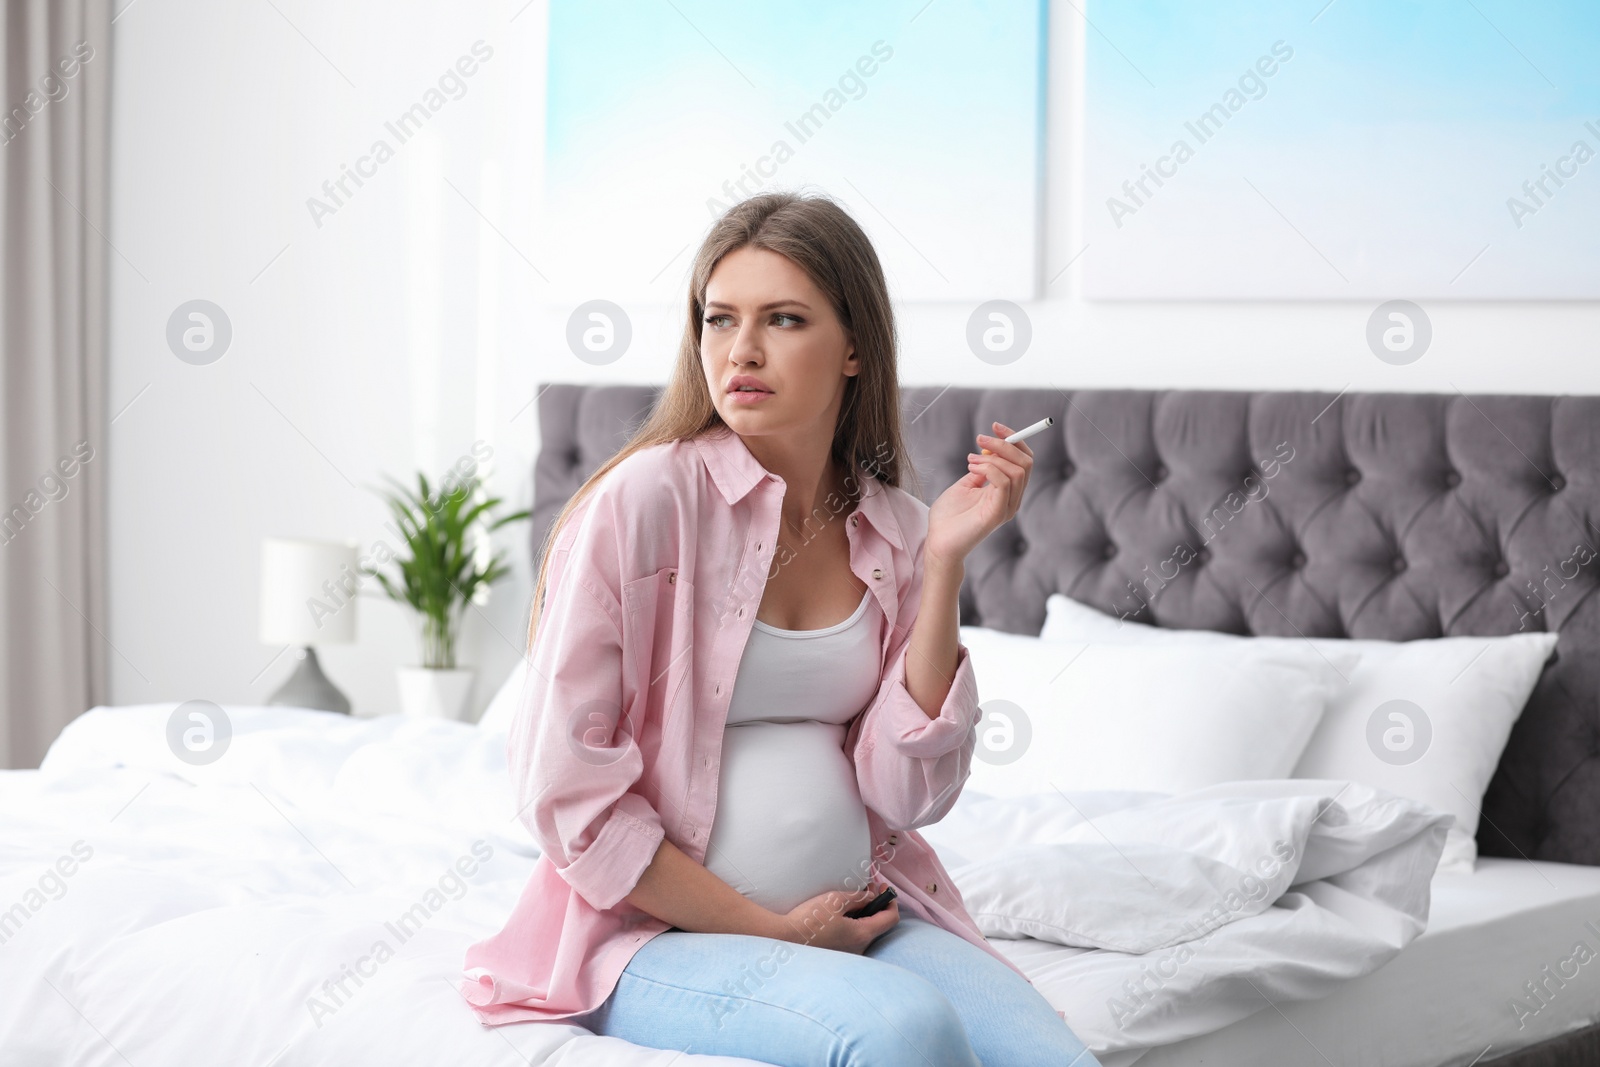 Photo of Young pregnant woman smoking cigarette in bedroom. Harm to unborn baby